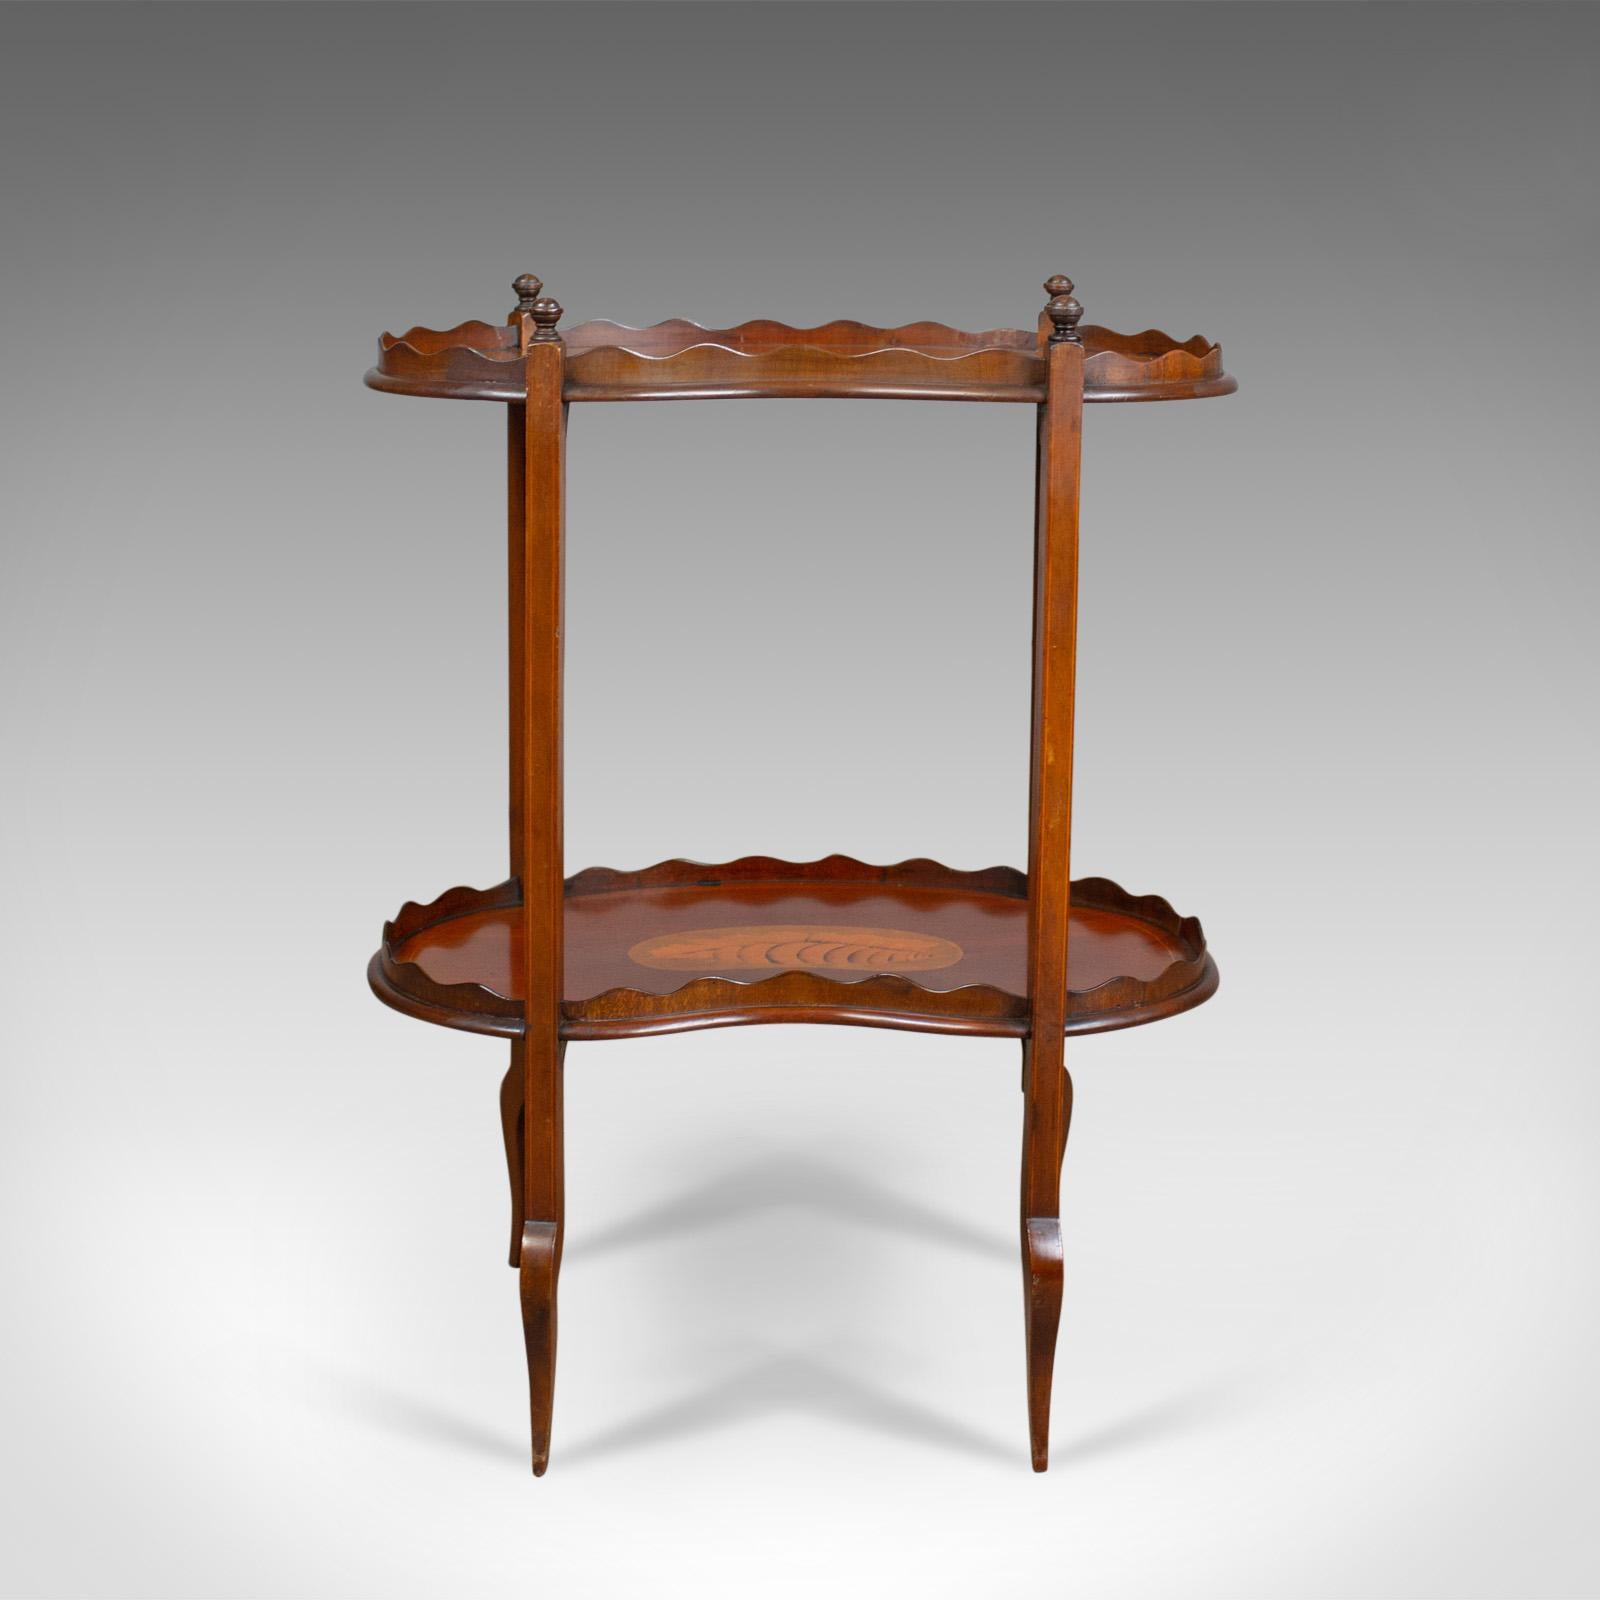 This is an antique tea table, an English, Edwardian, two tier, galleried, side table in mahogany from the early 20th century, circa 1910.

Attractive, well figured, mahogany
In russet hues with a desirable aged patina
Raised on appealing,